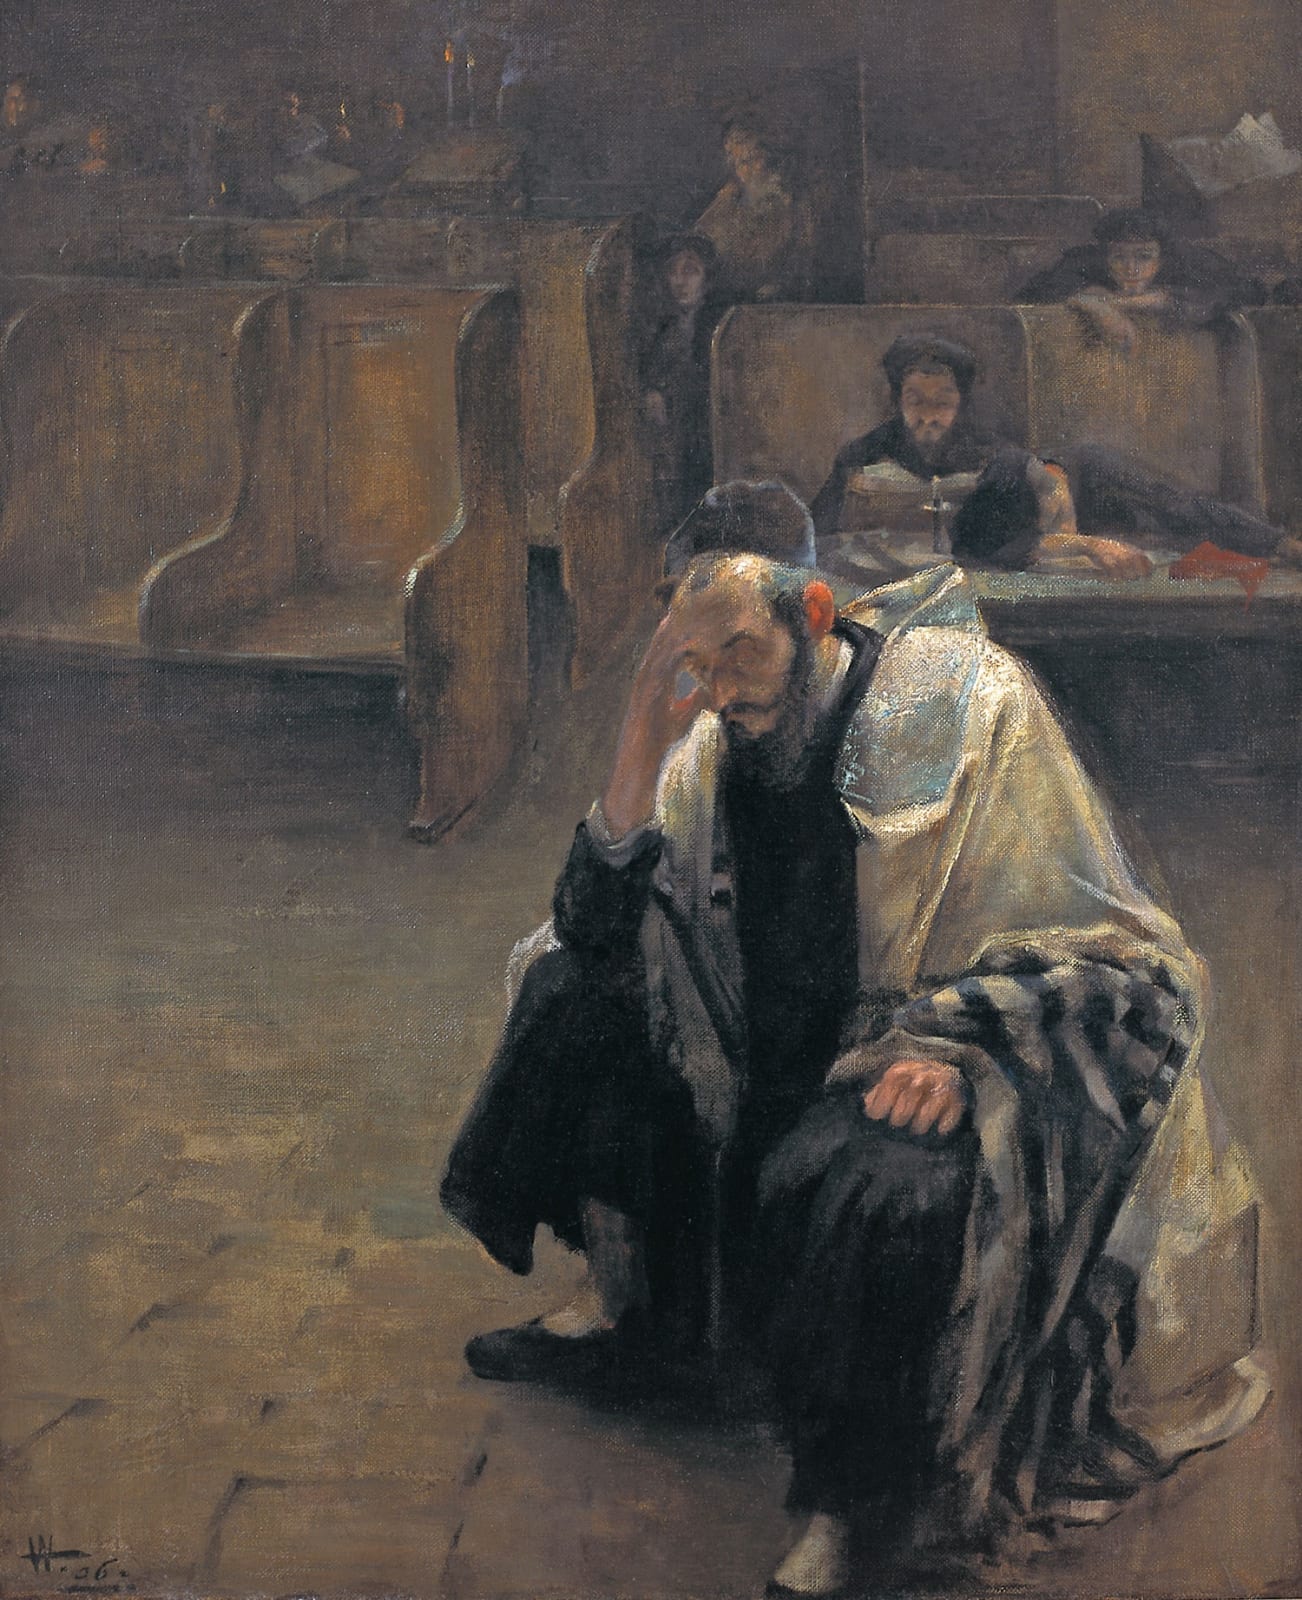 Alfred Wolmark (1877-1961) In the Synagogue 1906 Oil on canvas 106.5 x 88 cm Ben Uri Collection © Alfred Wolmark estate Acquired in 2013 with the assistance of the HLF, the V&A Purchase Grant Fund and Art Fund